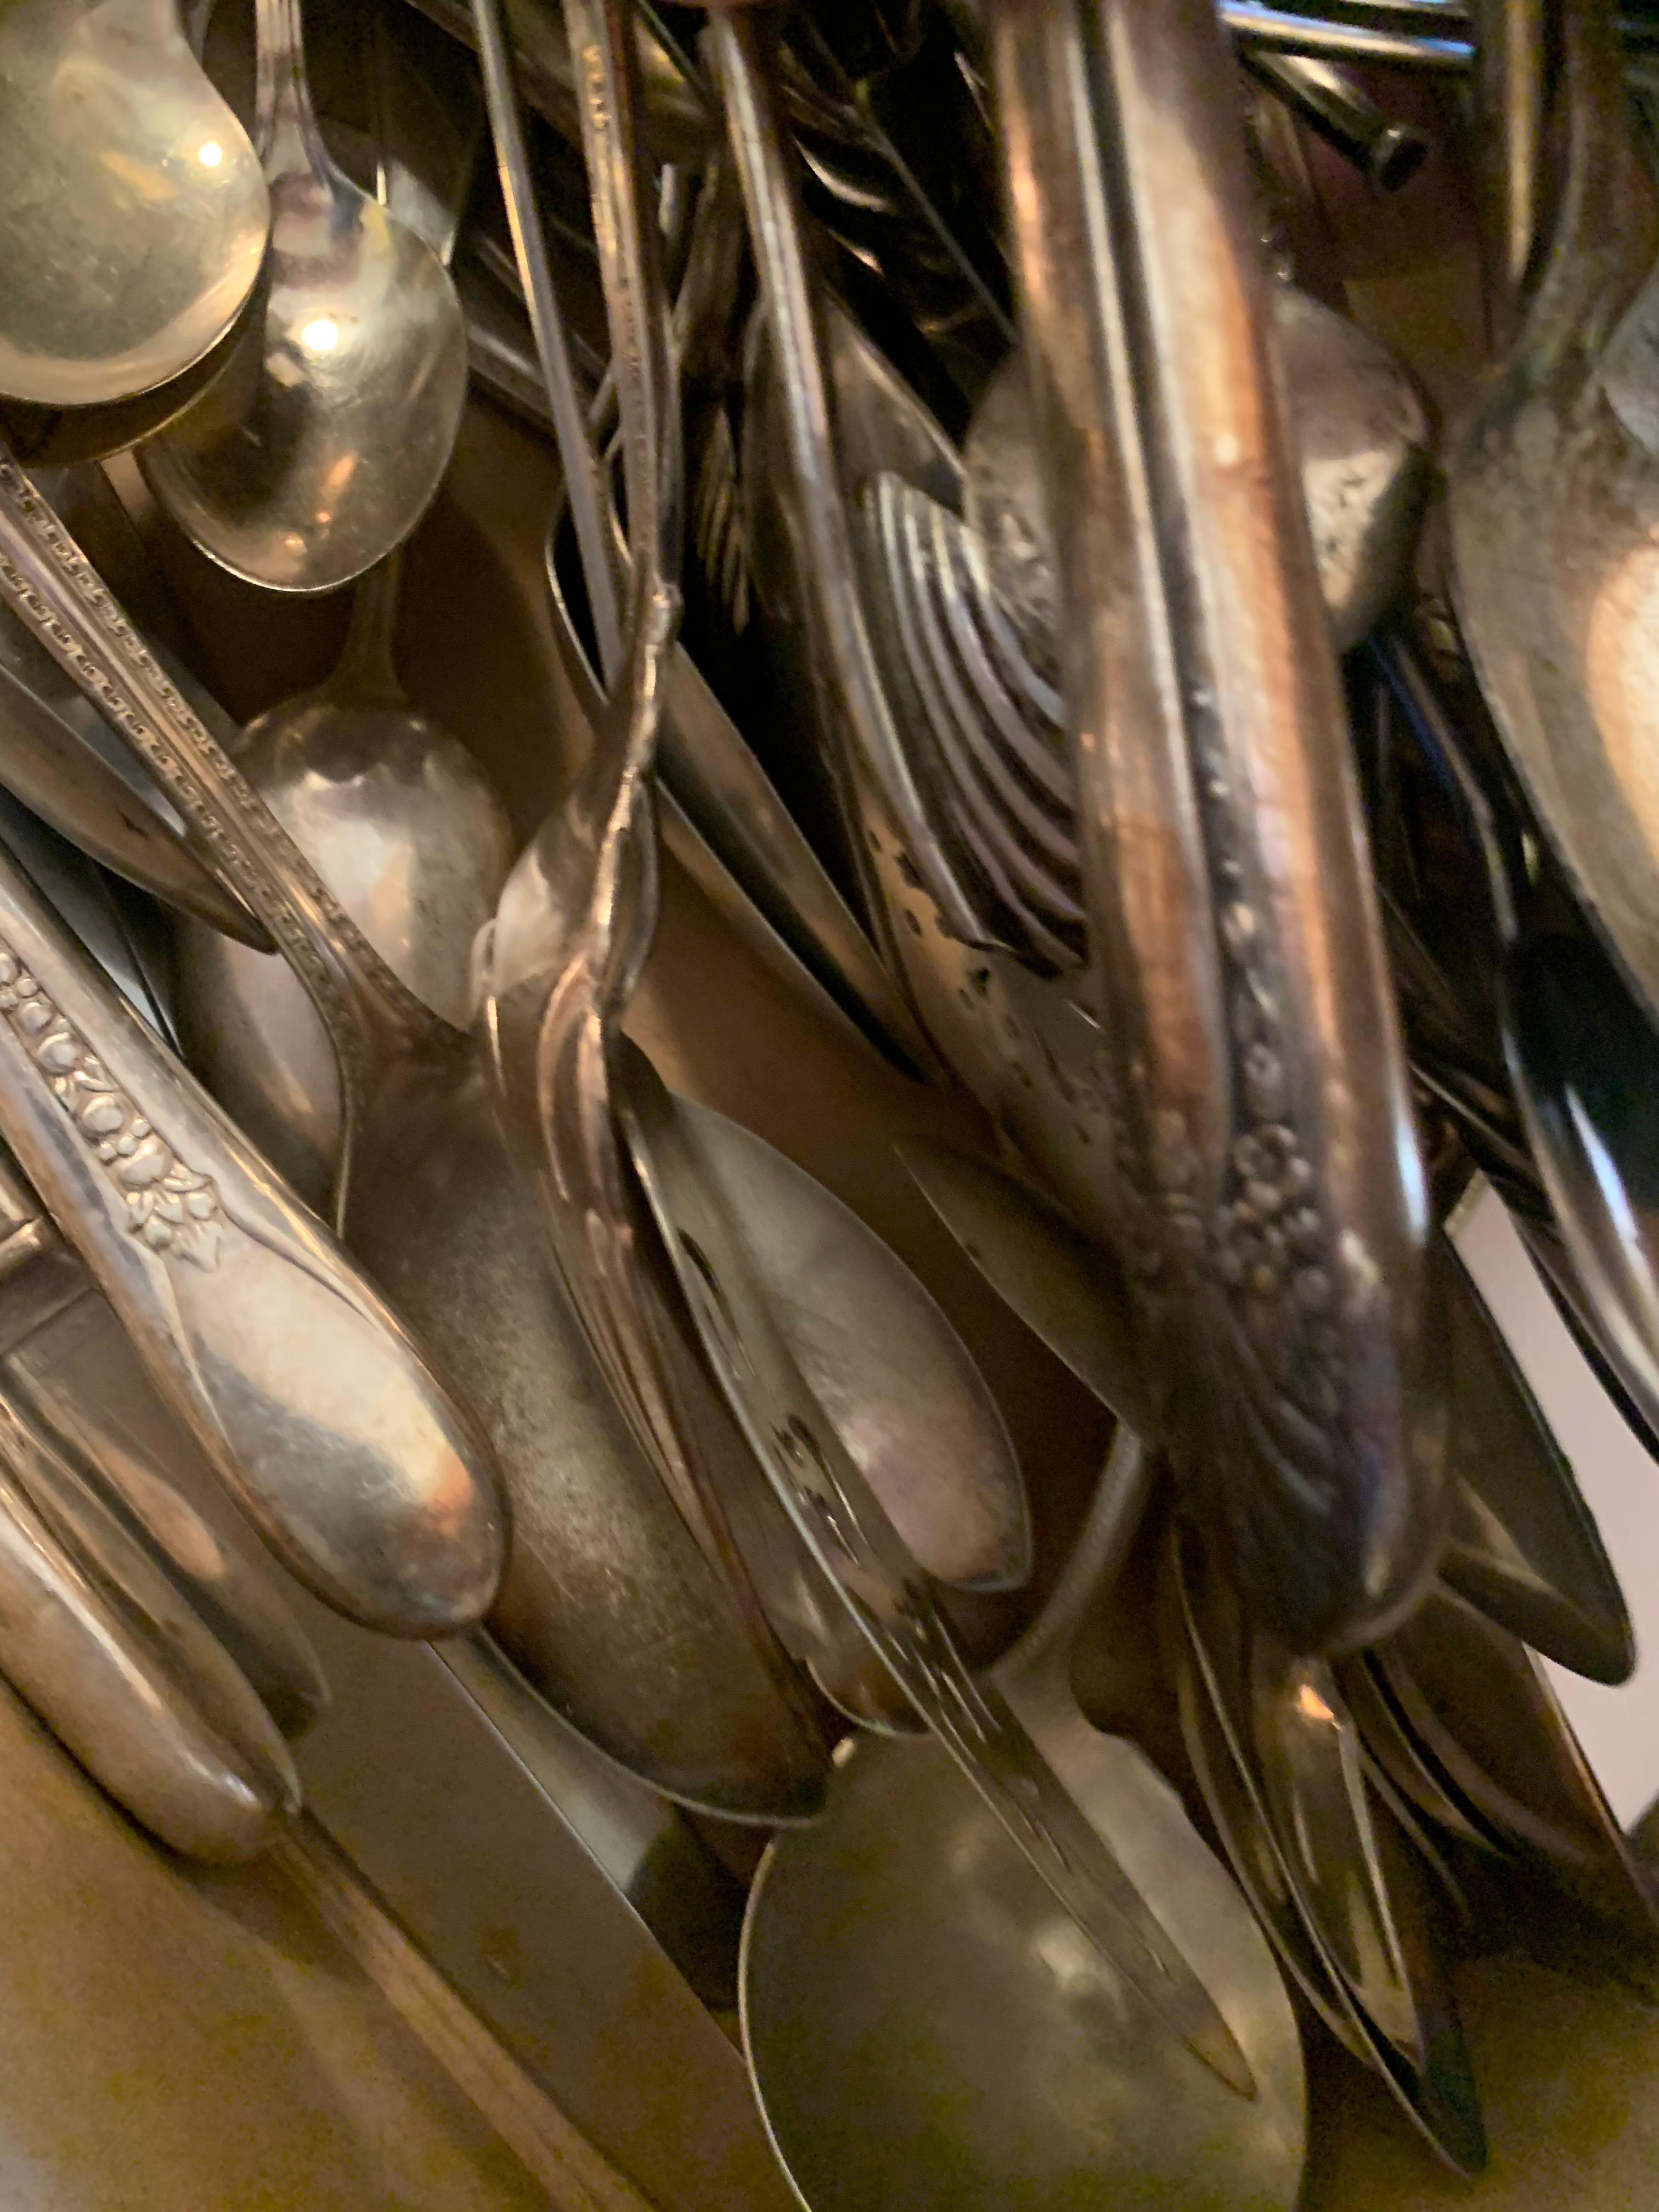 Large Group Of Vintage Silverware Great For Making Jewelry!